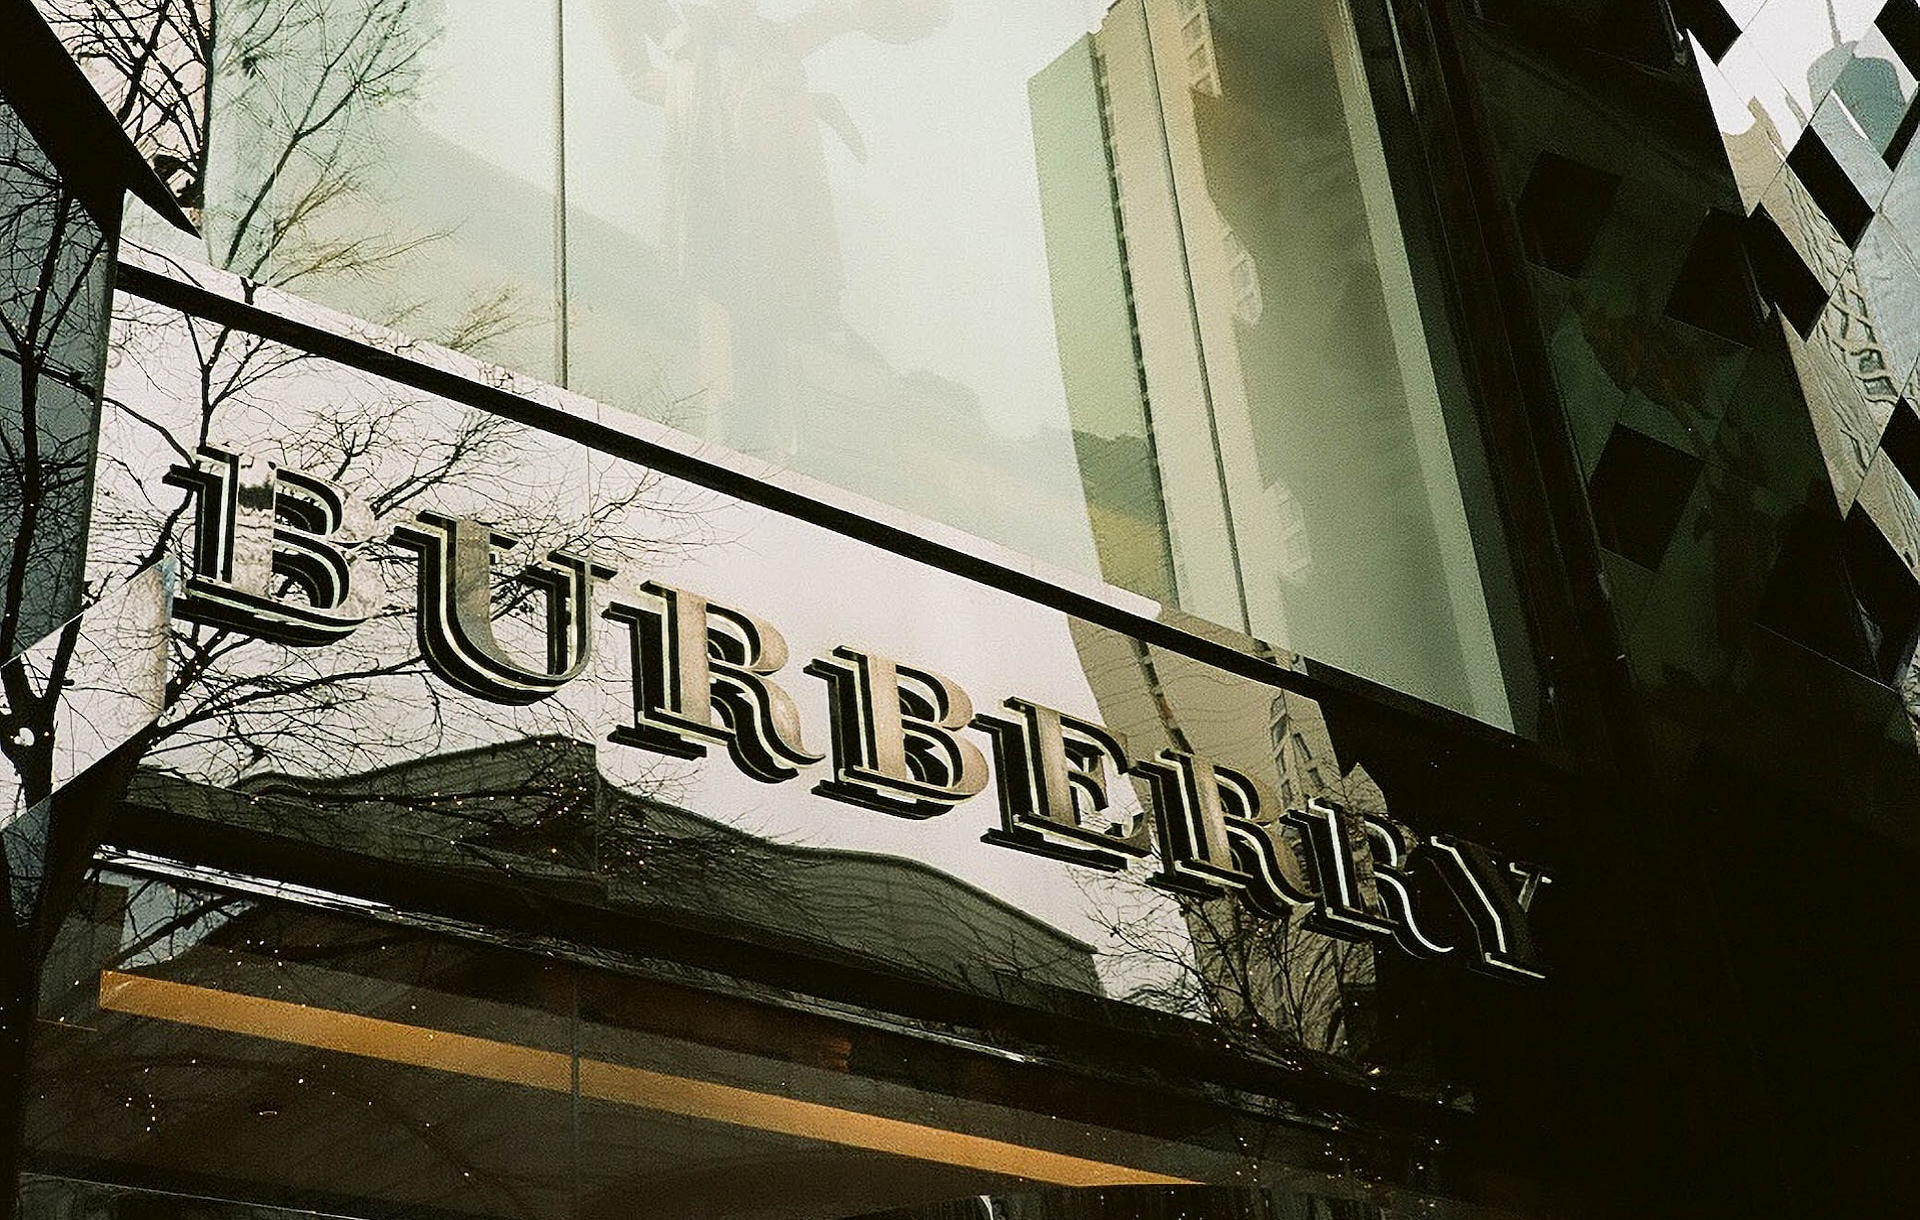 Fashion brands on Tumblr: Art of the Trench by Burberry.